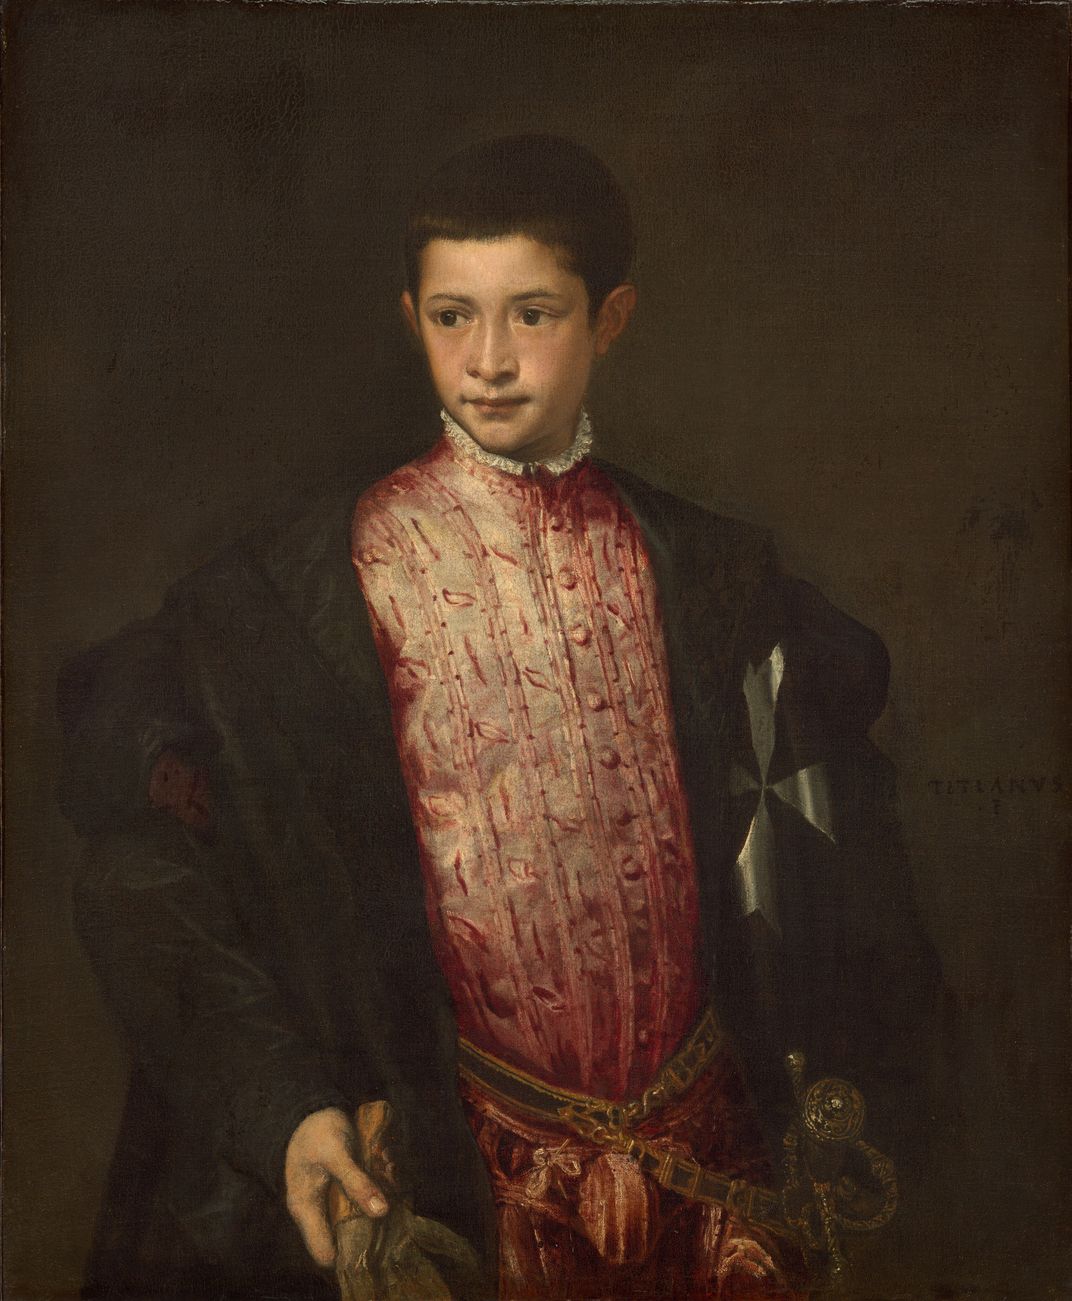 A portrait of a young boy wearing elaborate robes and standing in front of a dark brown background